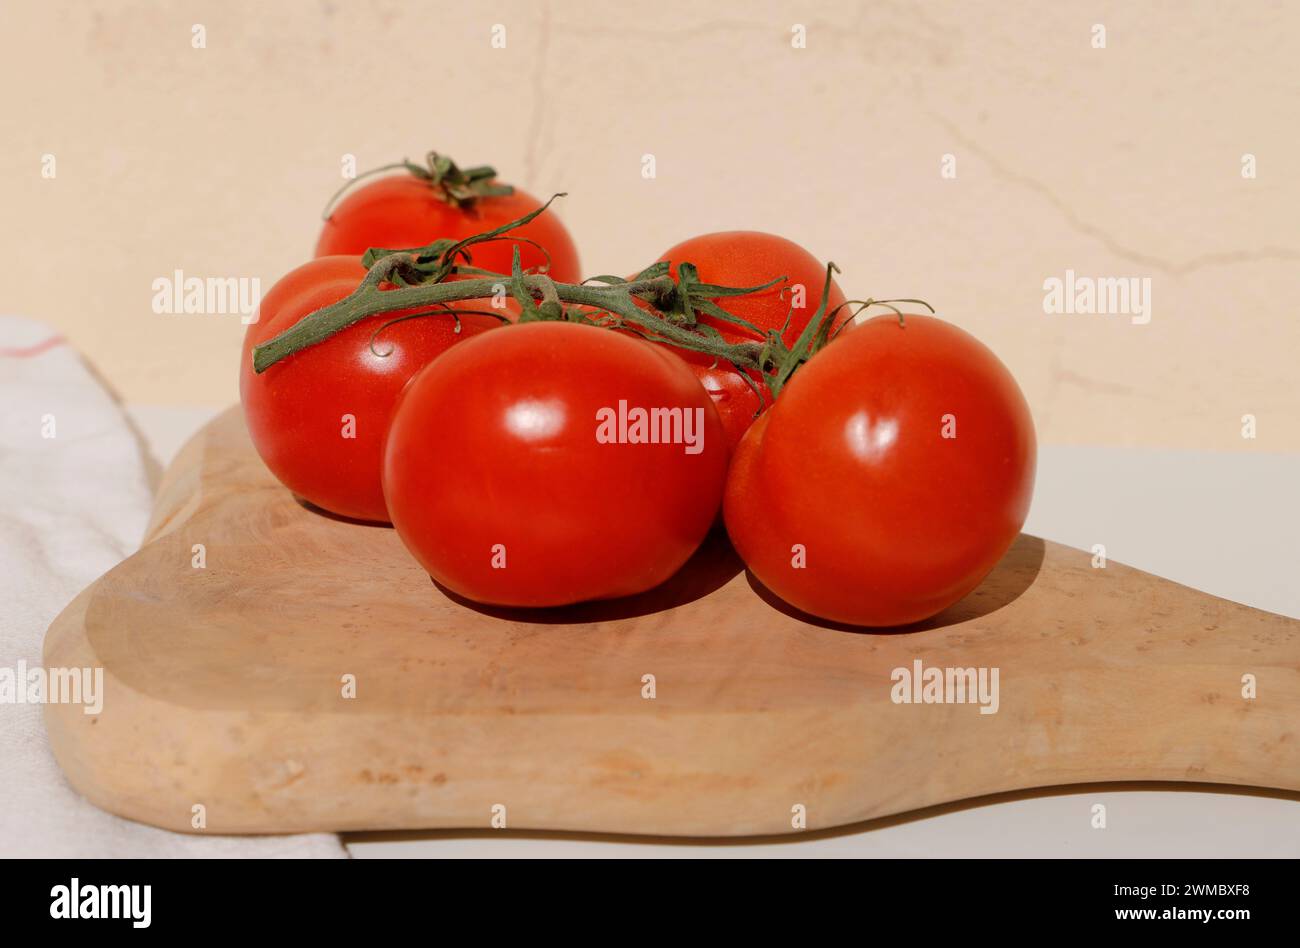 Delicious fresh red tomatoes Stock Photo